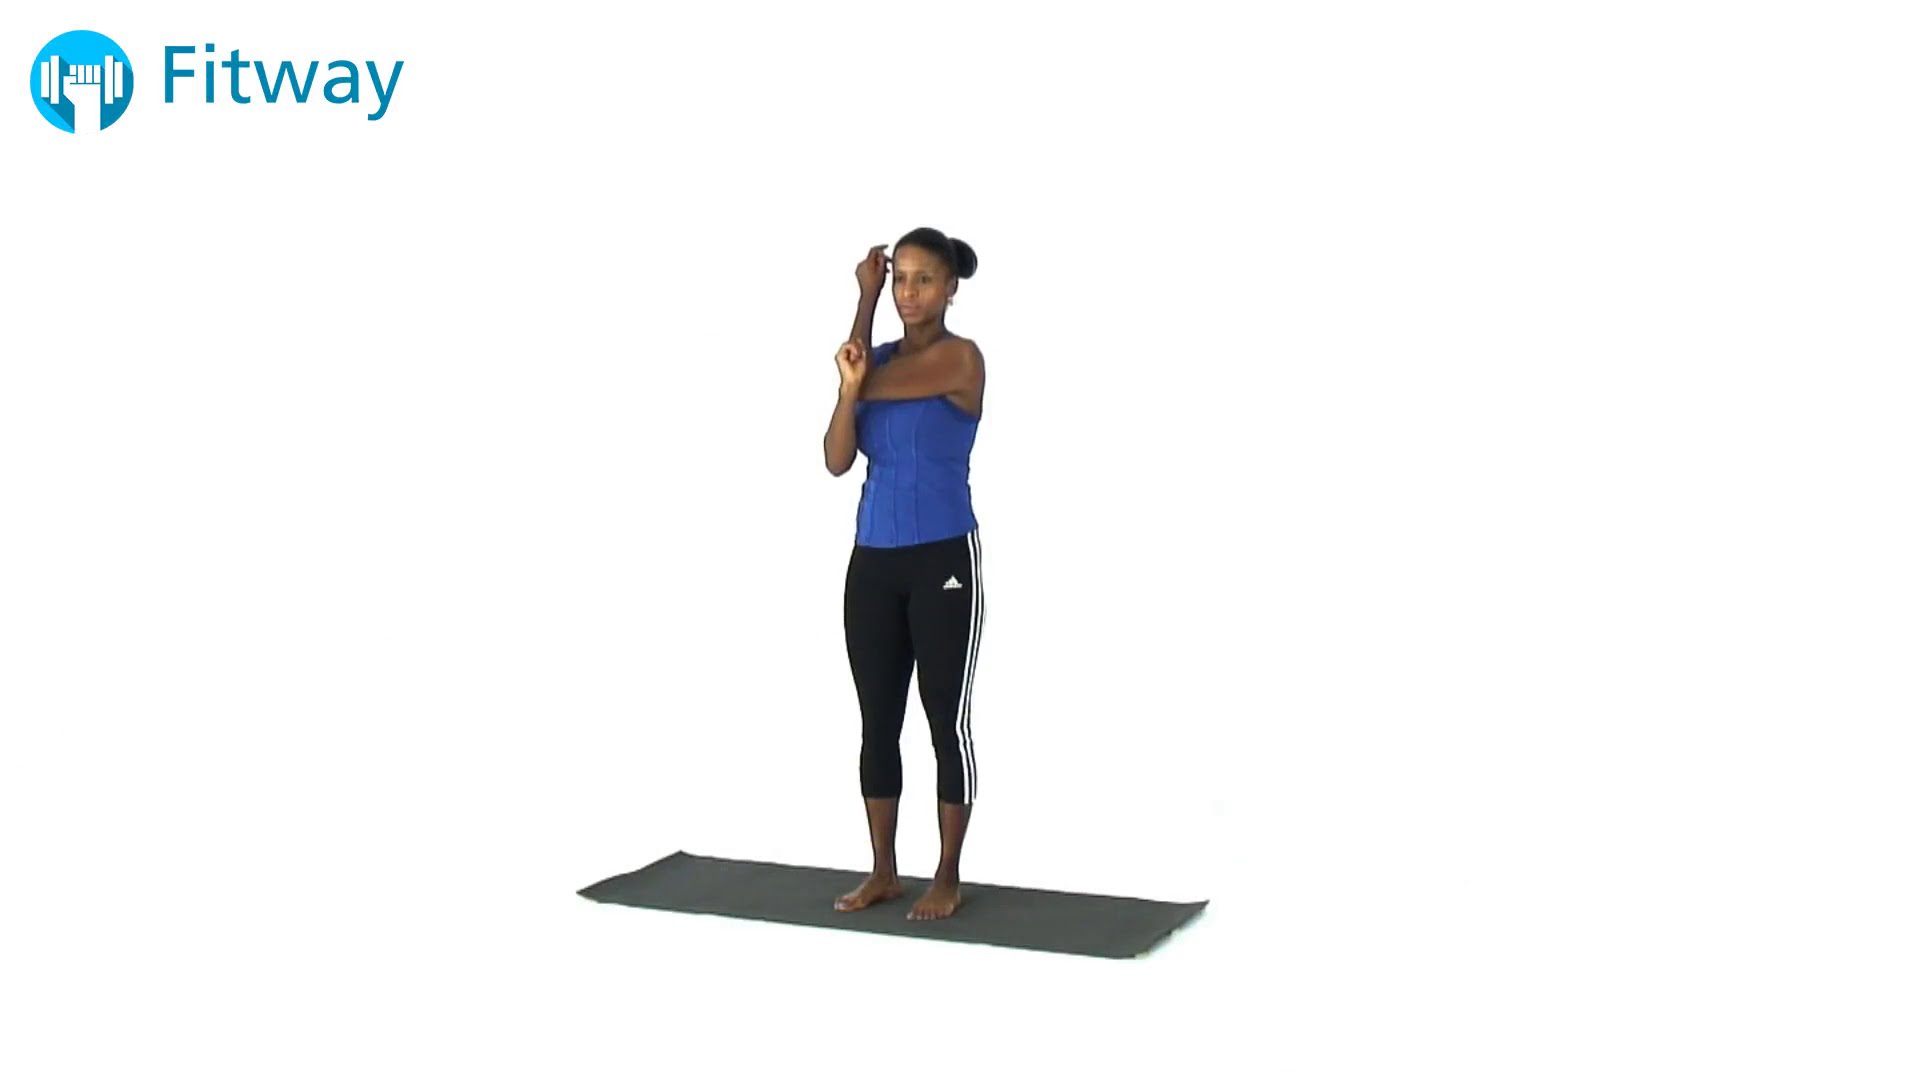 How To Do: Deltoids - Standing Cross Body Arms Cross | Stretch ...